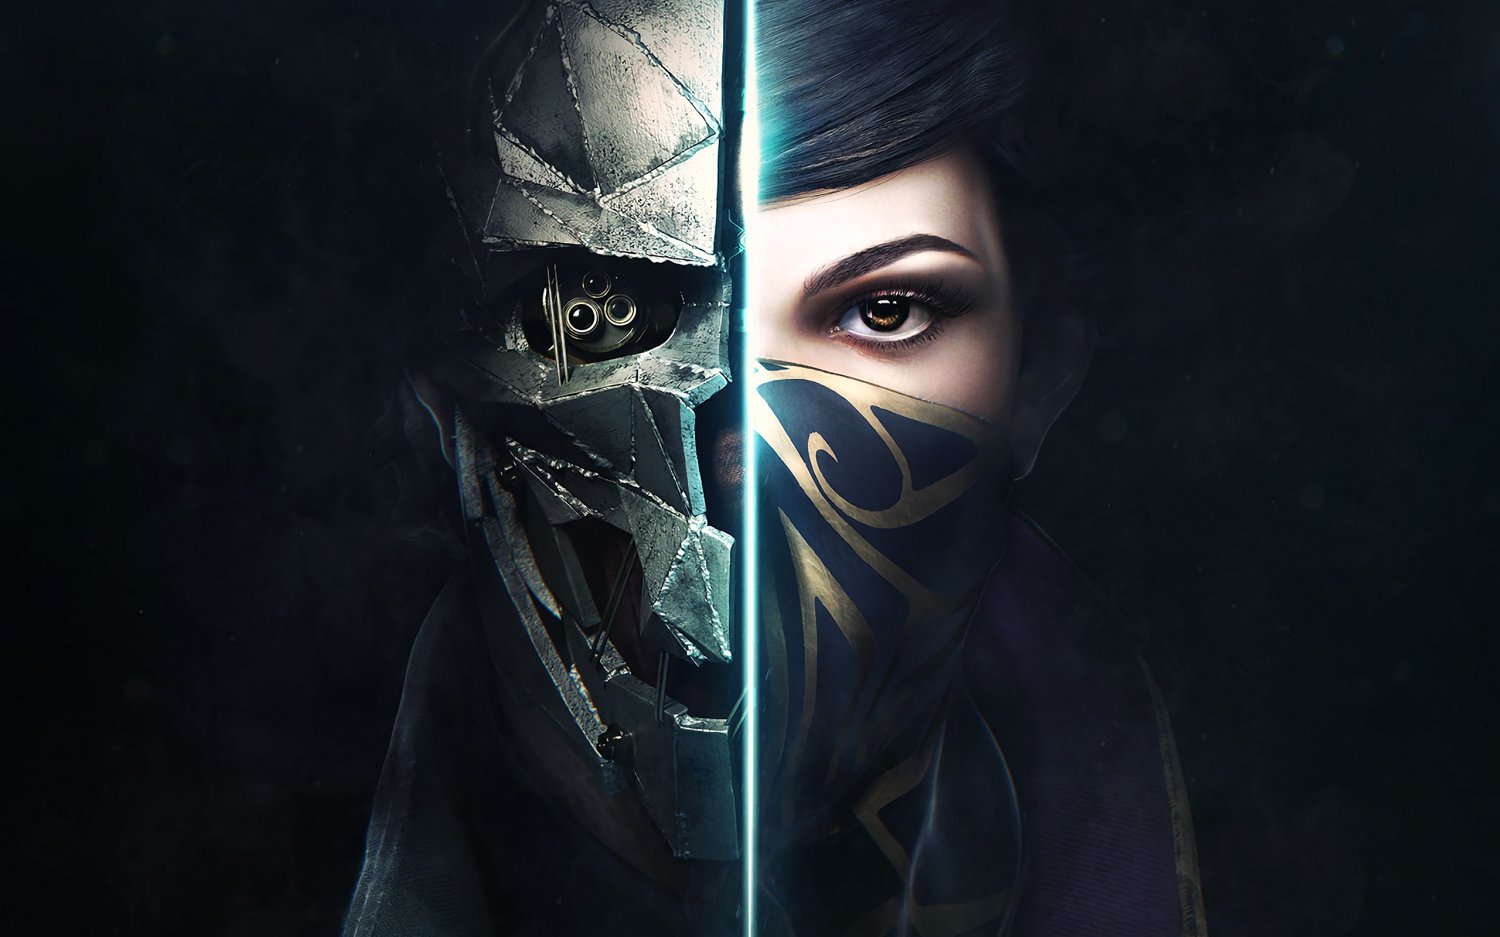 Dishonored 2 Game 18"x28" (45cm/70cm) Poster